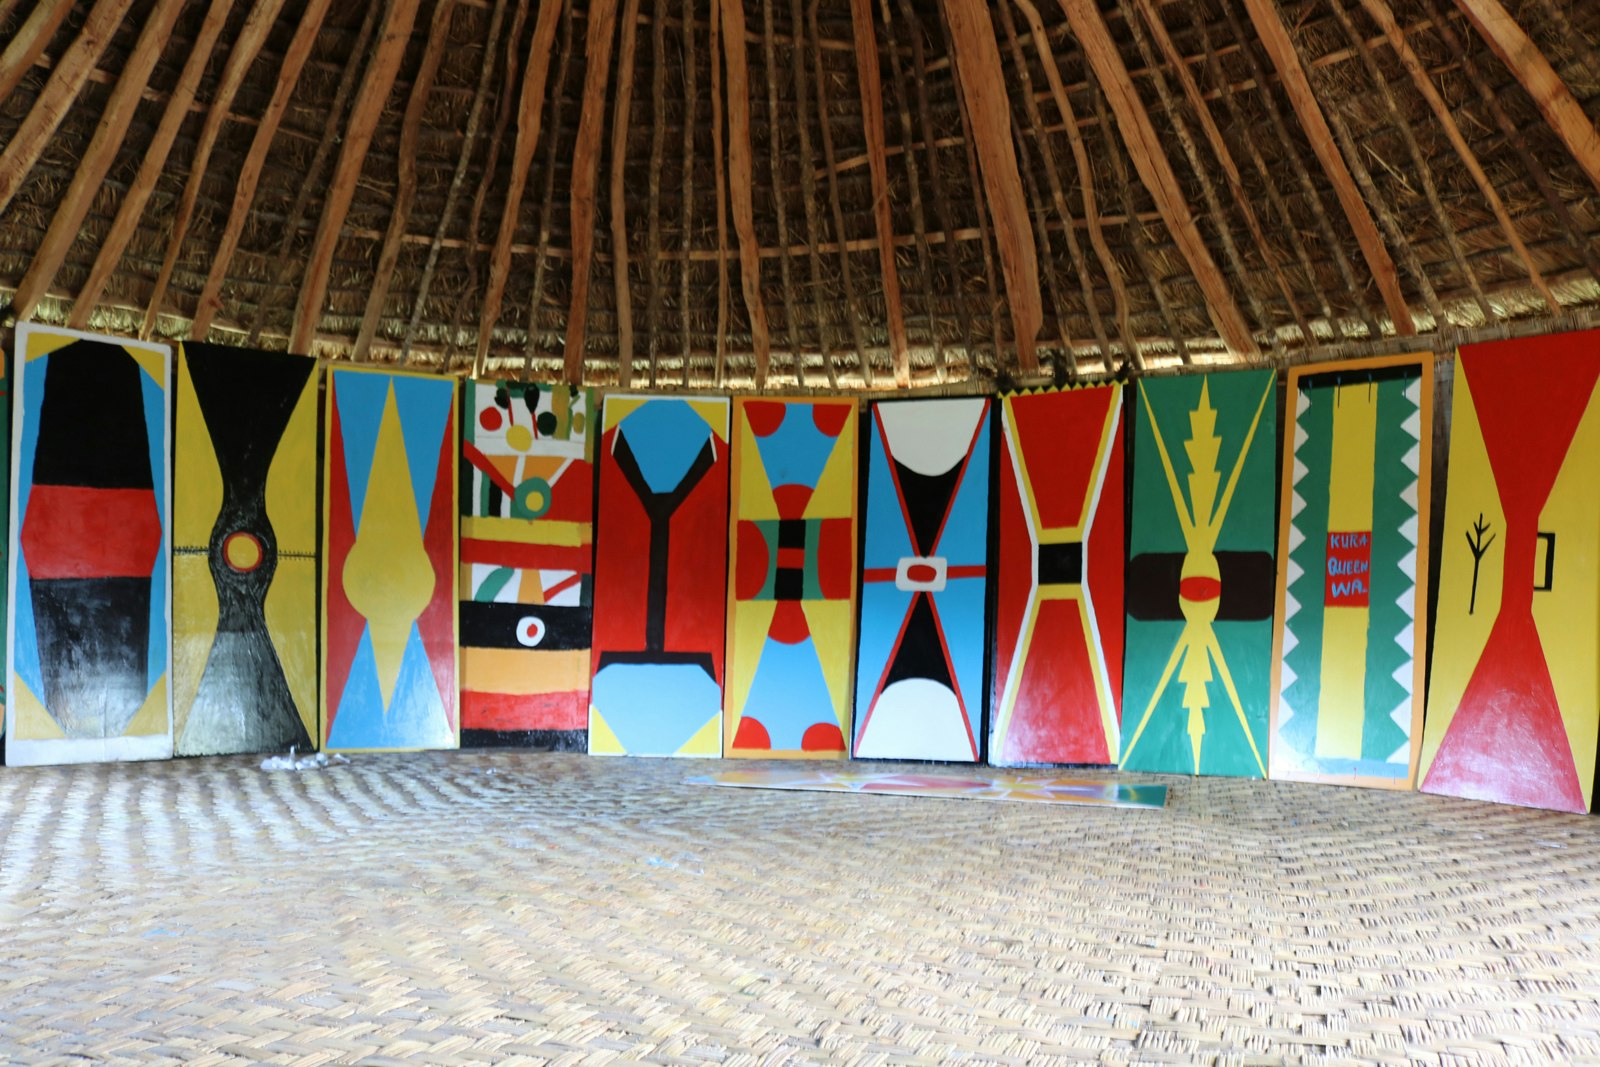 A row of kuman (shields) painted in different geometric shapes and bright reds, yellows, blues and greens. They are lined up in a row inside a grass hut, stretching from the floor to the base of the roof.